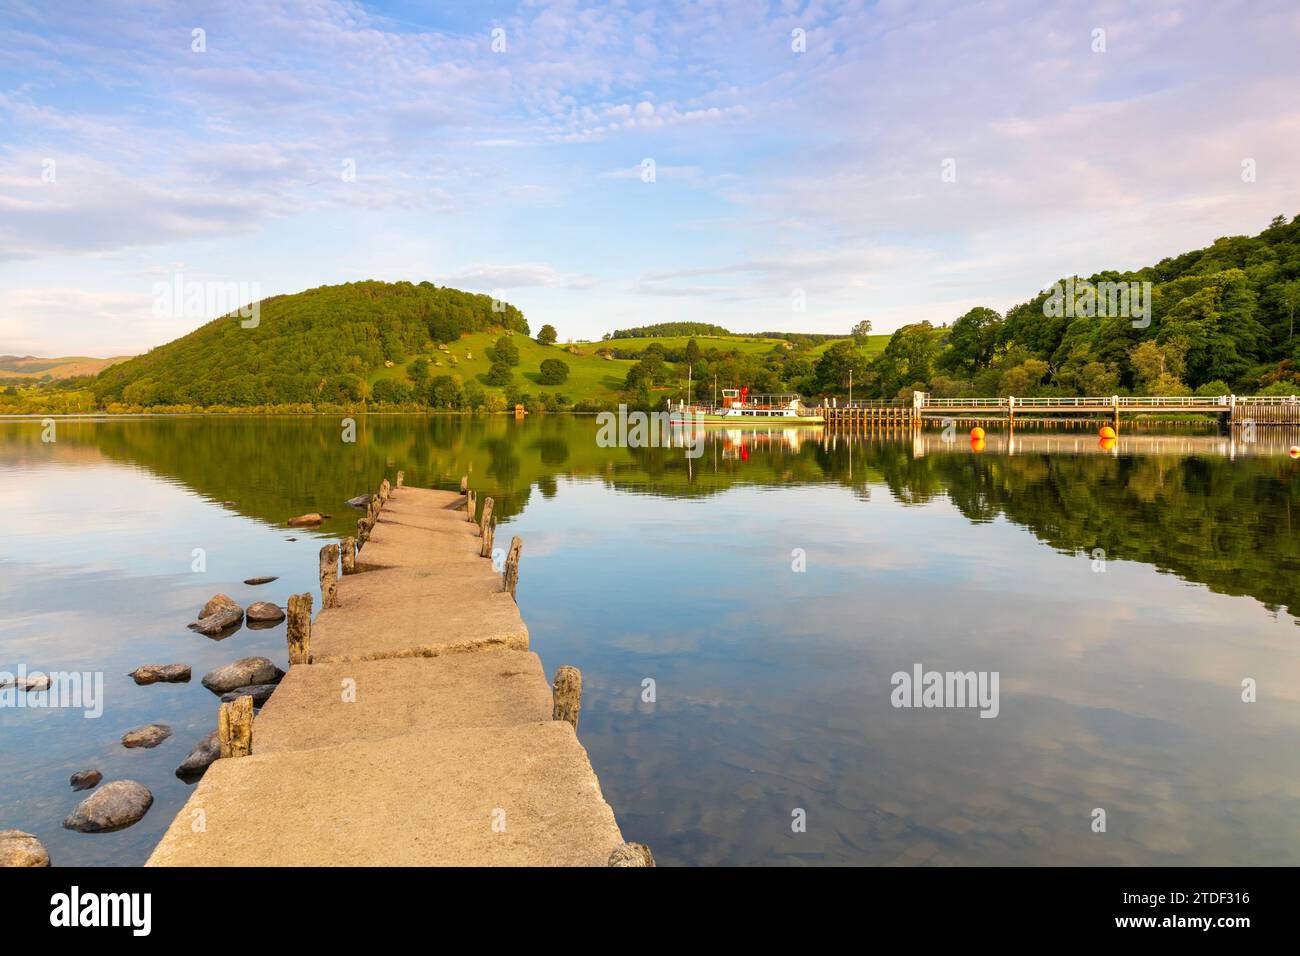 Wooden Pier and steamer boat in background, Ullswater, Lake District National Park, UNESCO World Heritage Site, Cumbria, England, United Kingdom Stock Photo